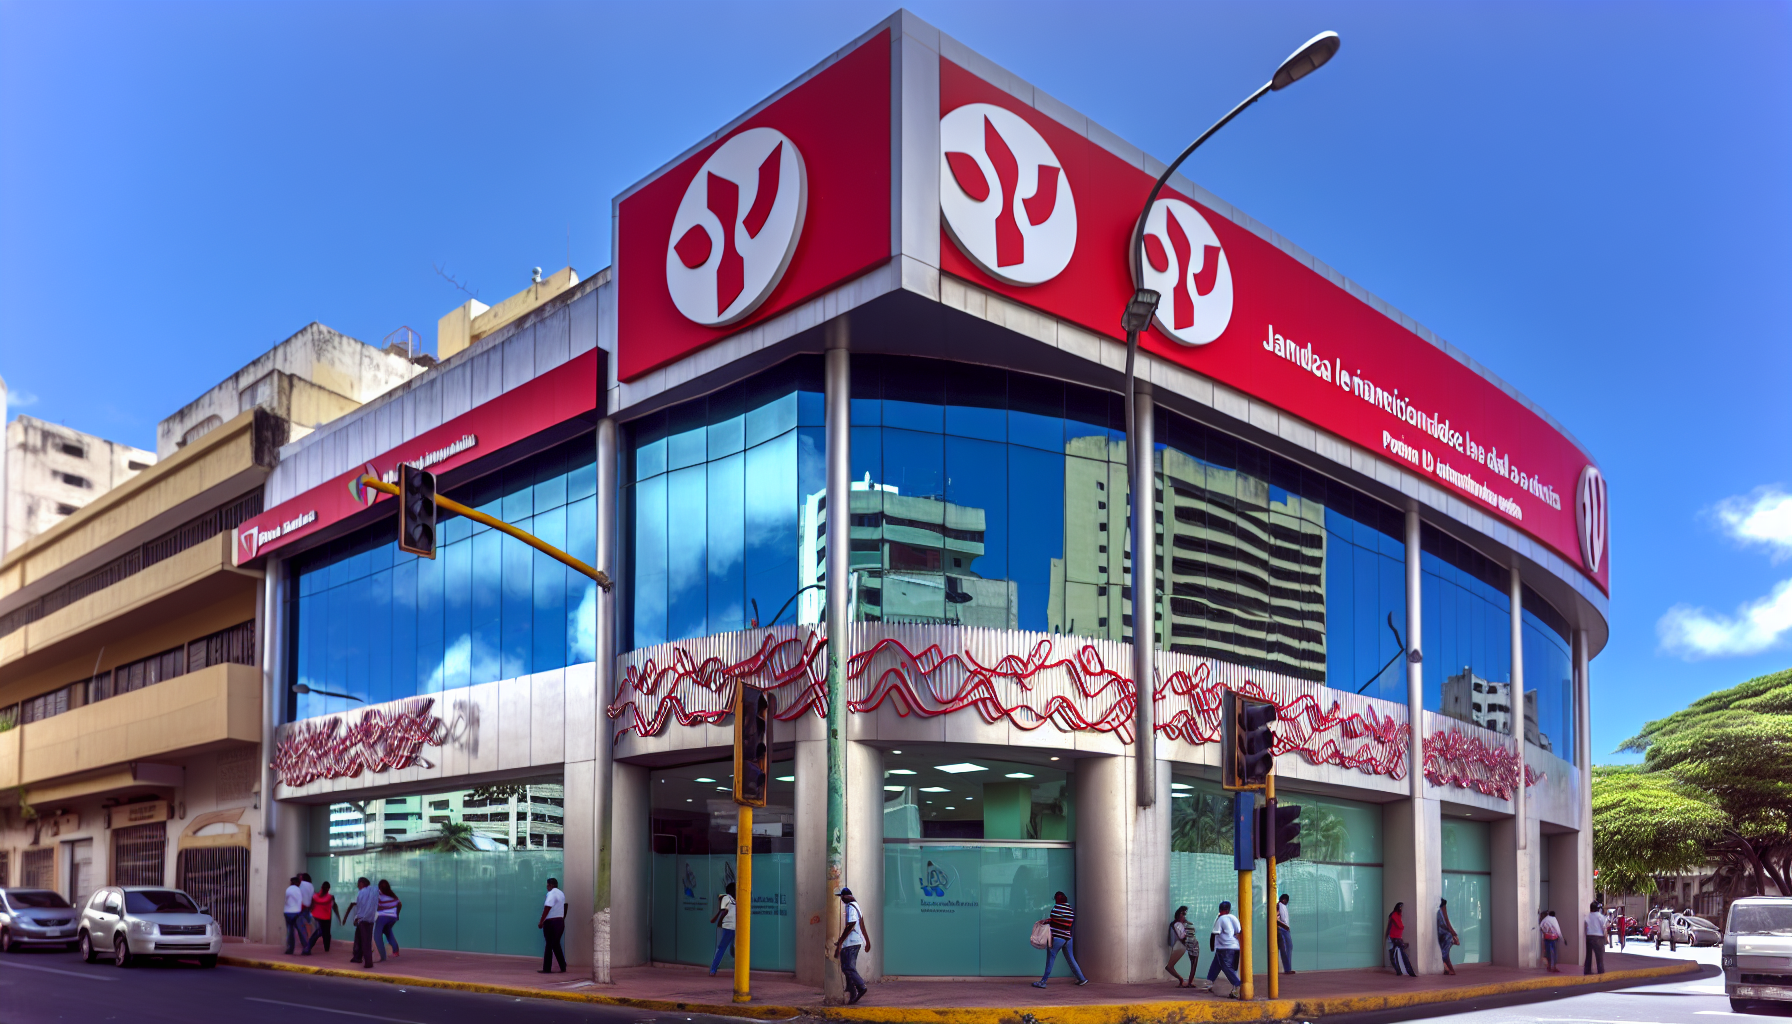 Scotiabank branch in Dominican Republic